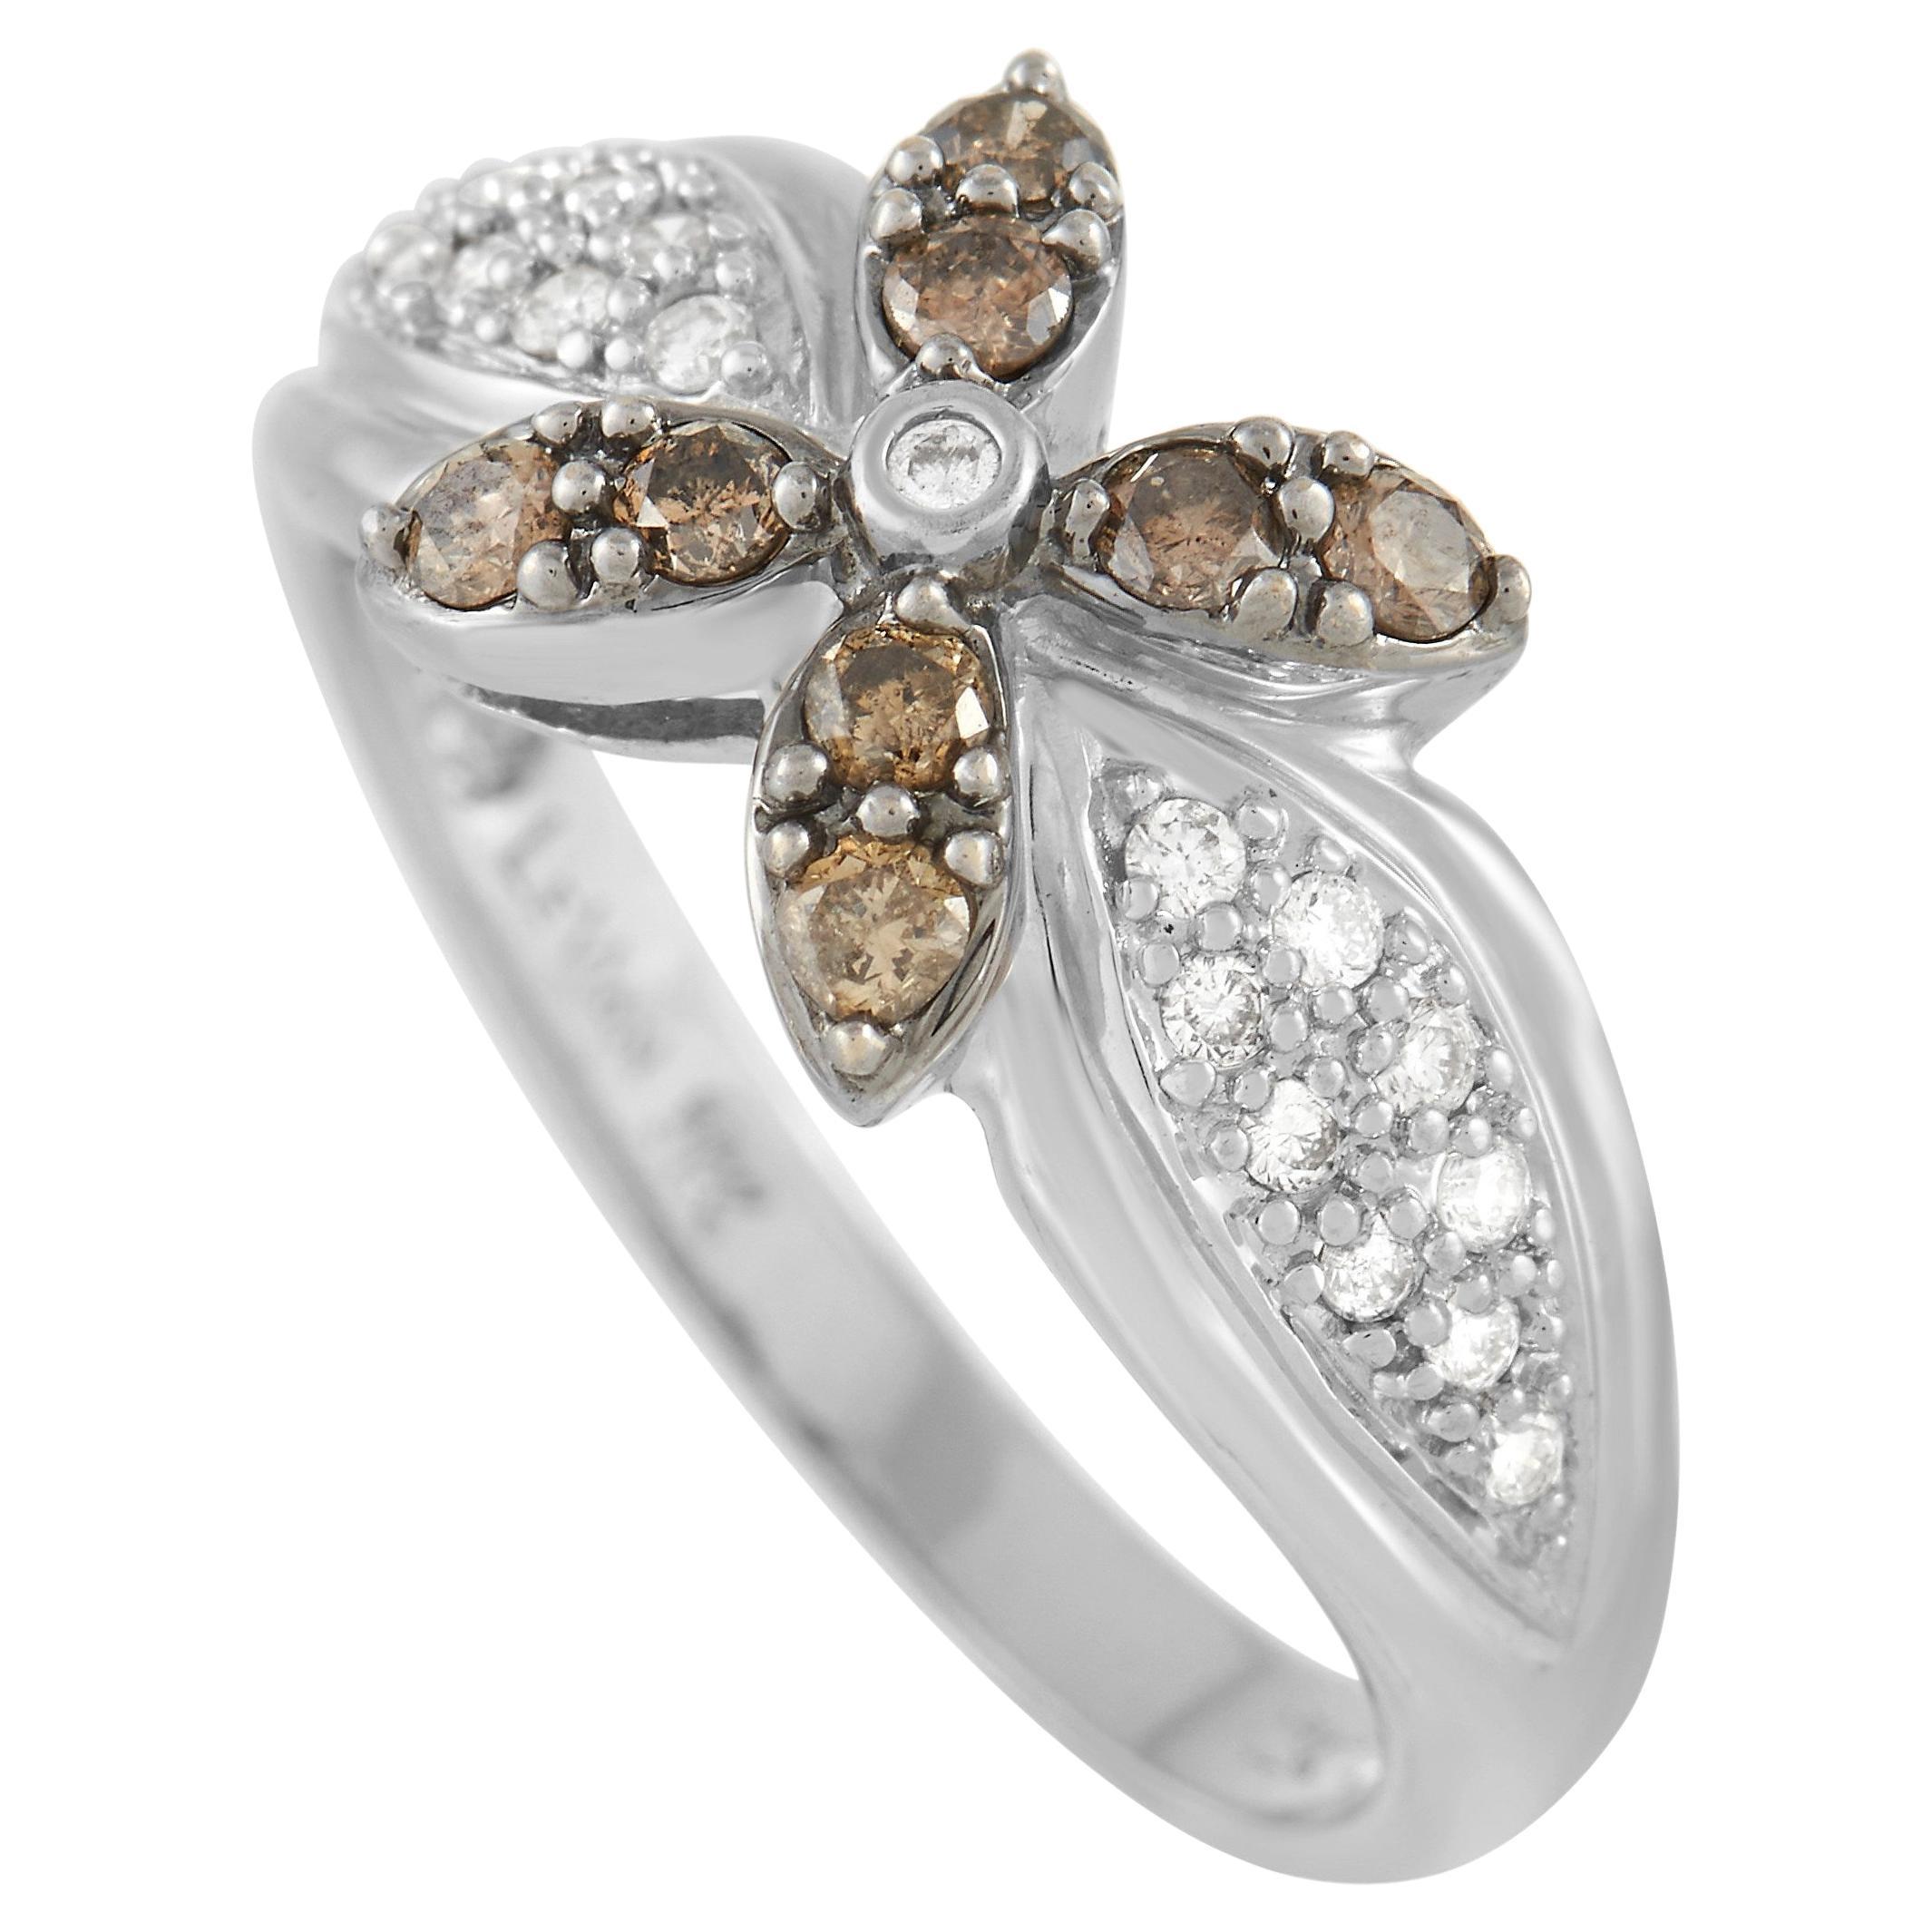 Le Vian 18K White Gold White and Brown Diamond Flower Ring For Sale